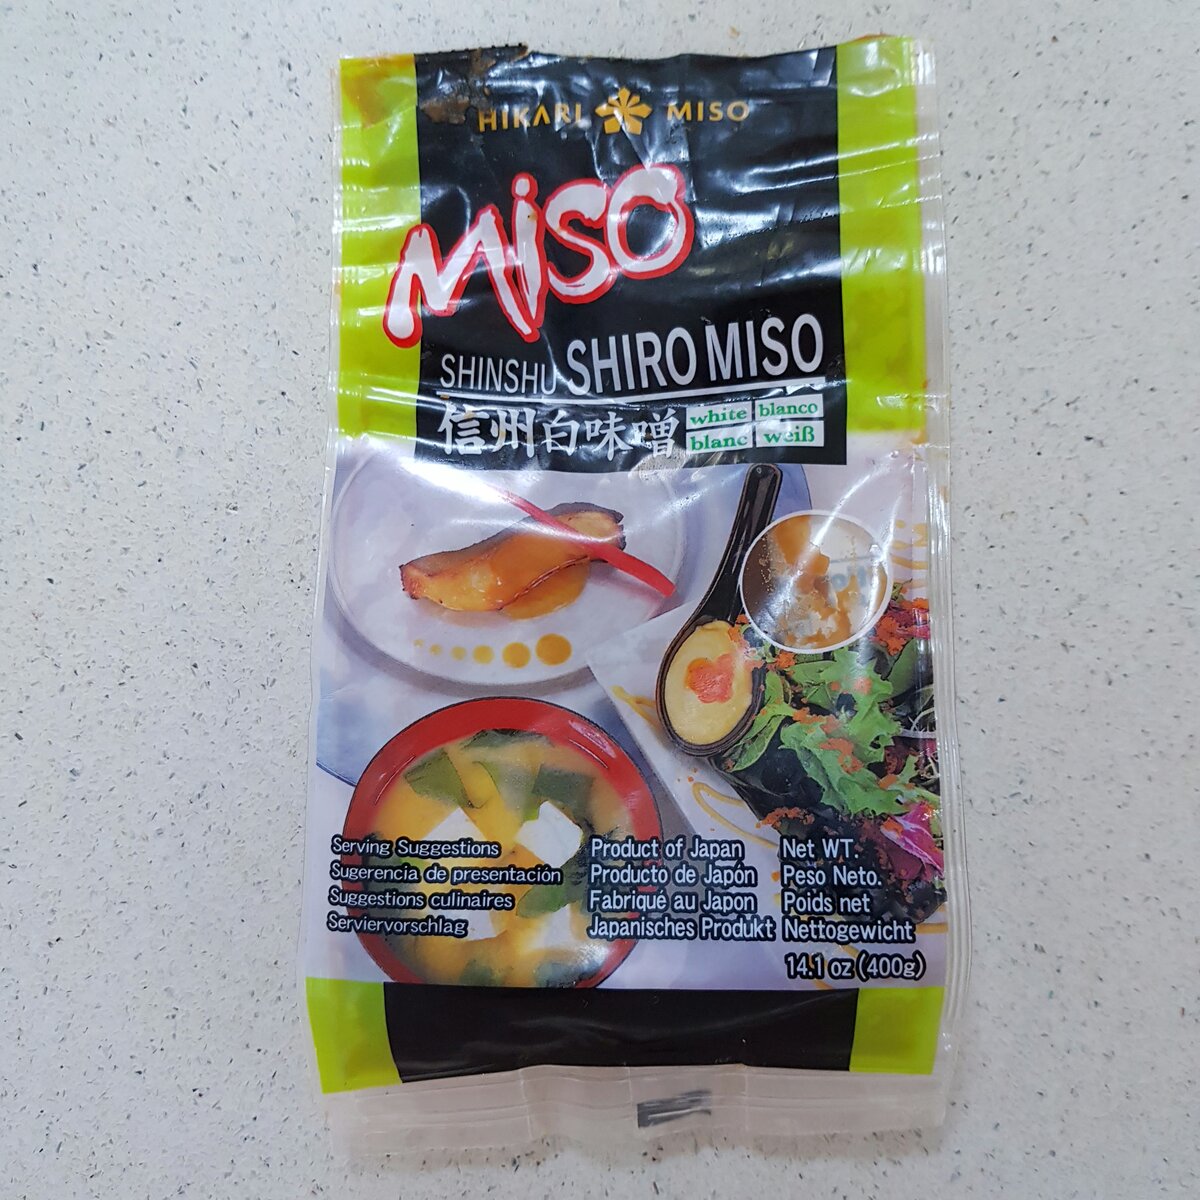 The Strong miso we use